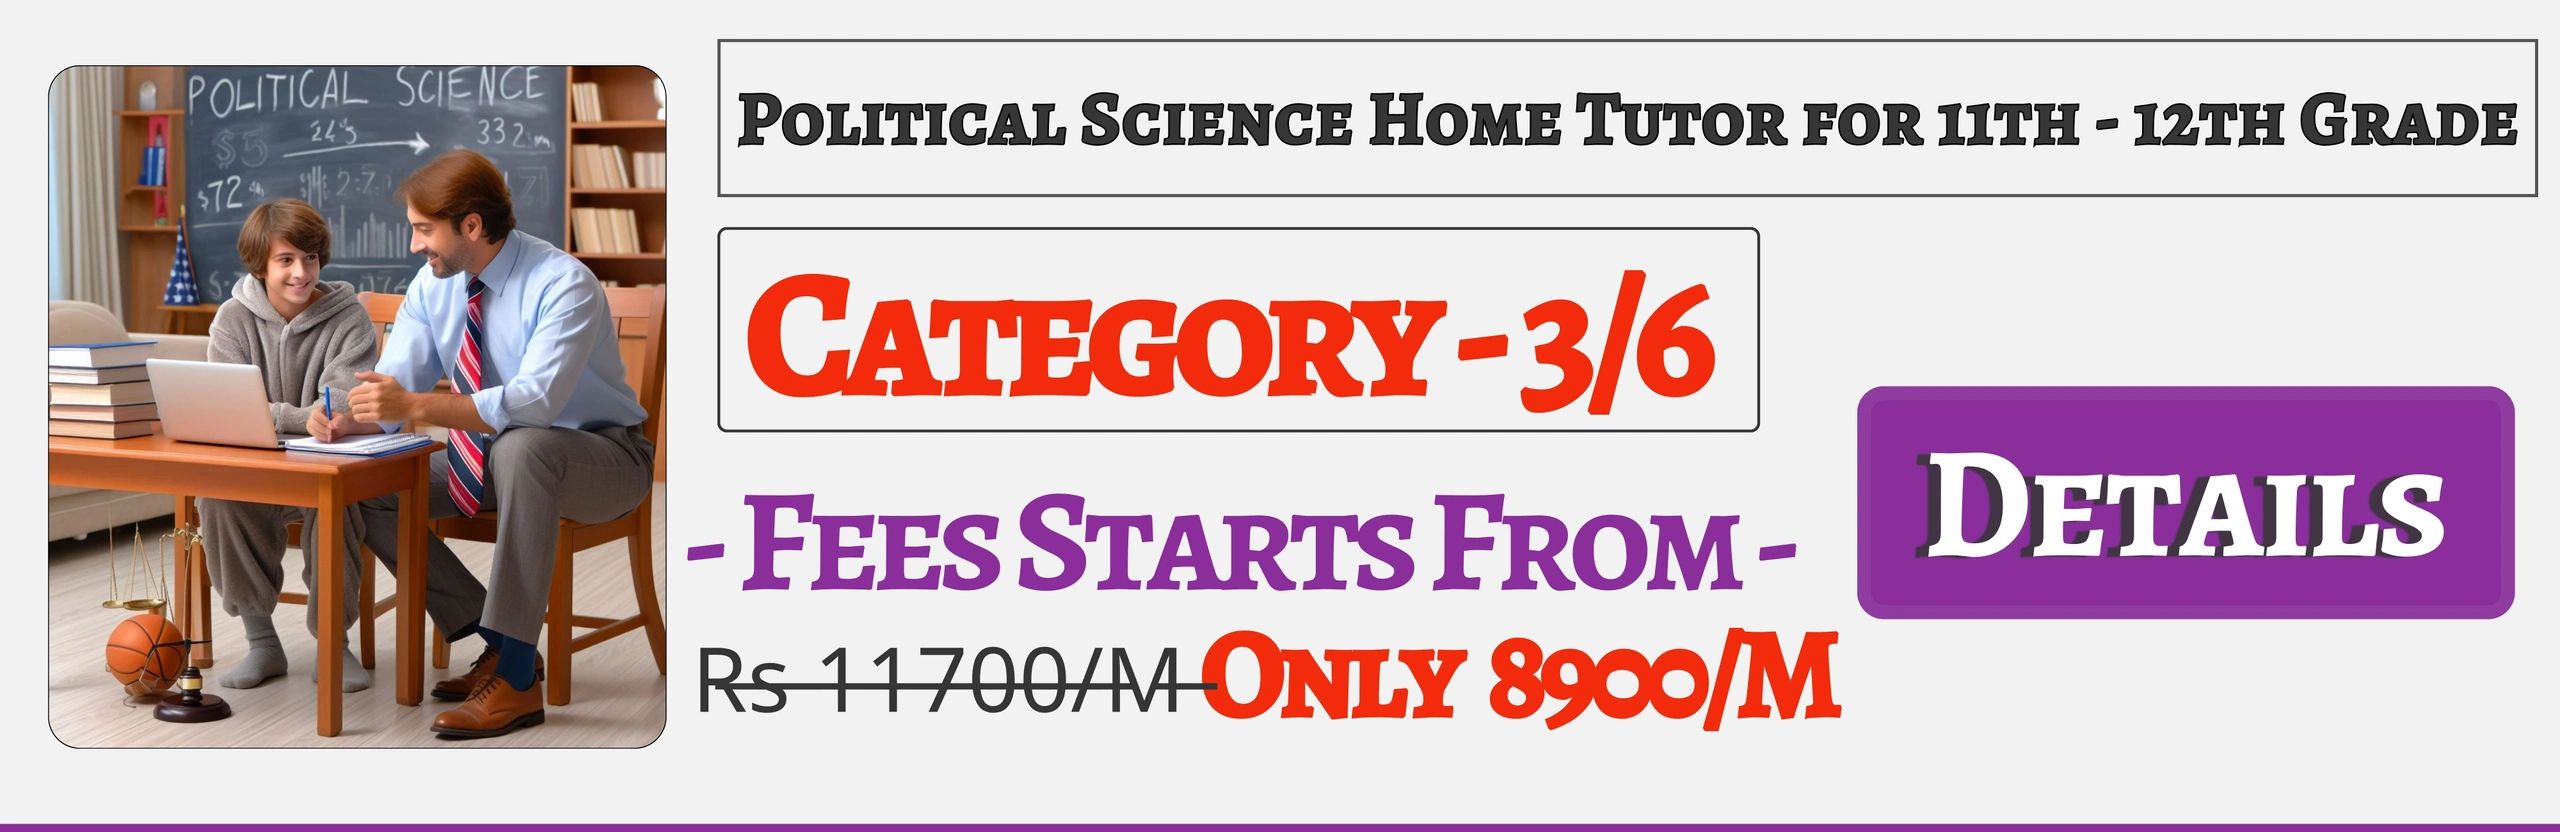 Book Best Nearby Political Science Home Tuition Tutors For 11th & 12th In Jaipur , Fees Only 8900/M